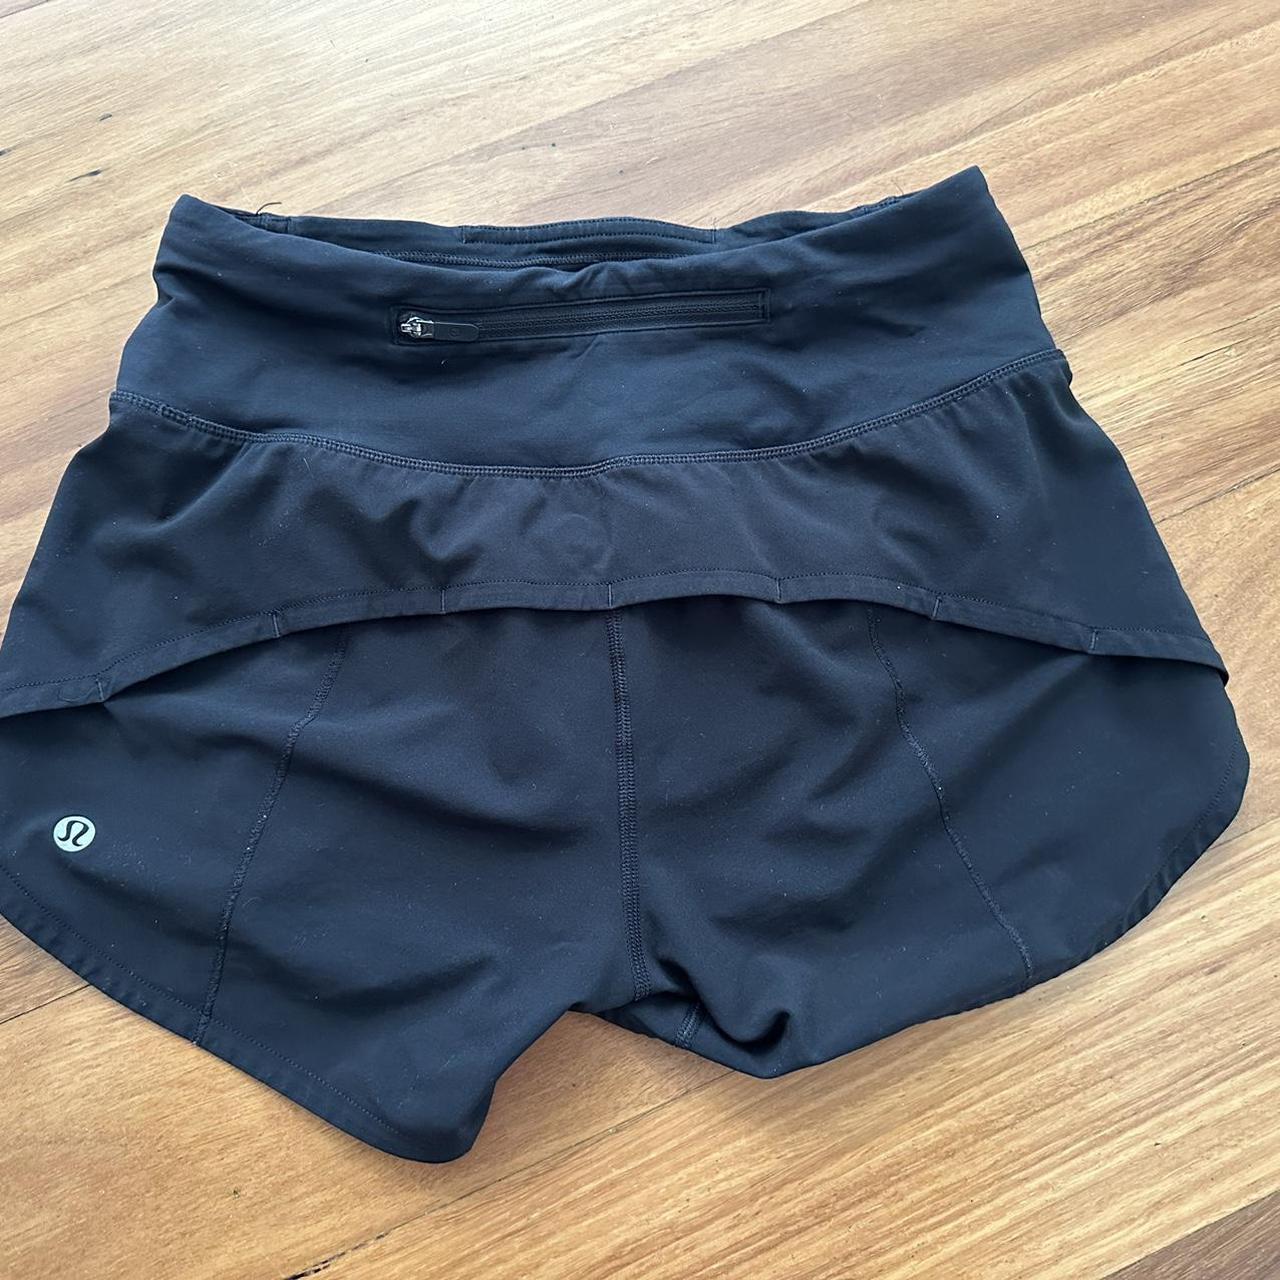 Lululemon Shorts US 2 Selling as doesn’t fit anymore - Depop